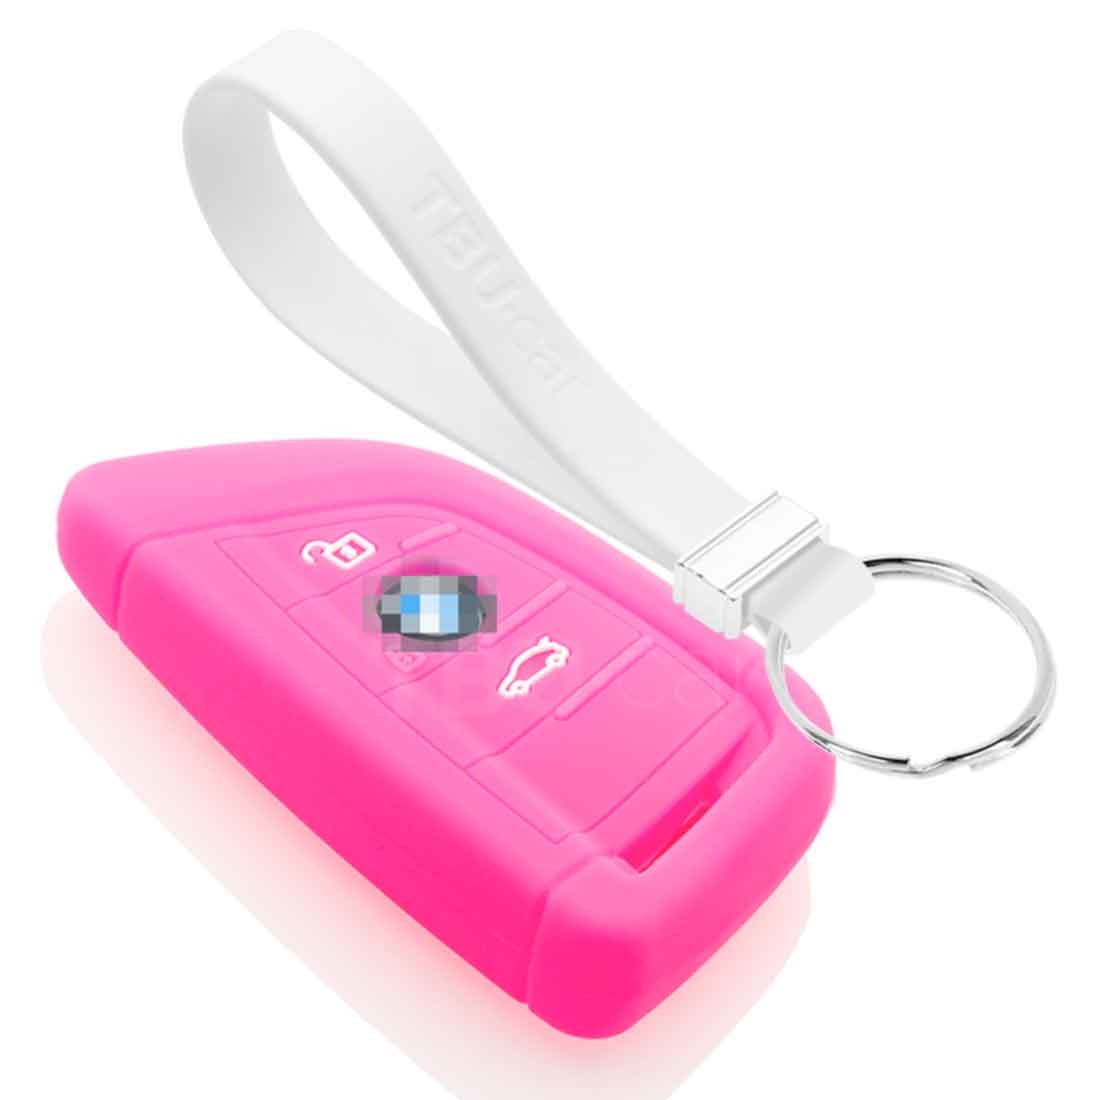 TBU car TBU car Car key cover compatible with BMW - Silicone Protective Remote Key Shell - FOB Case Cover - Fluor Pink